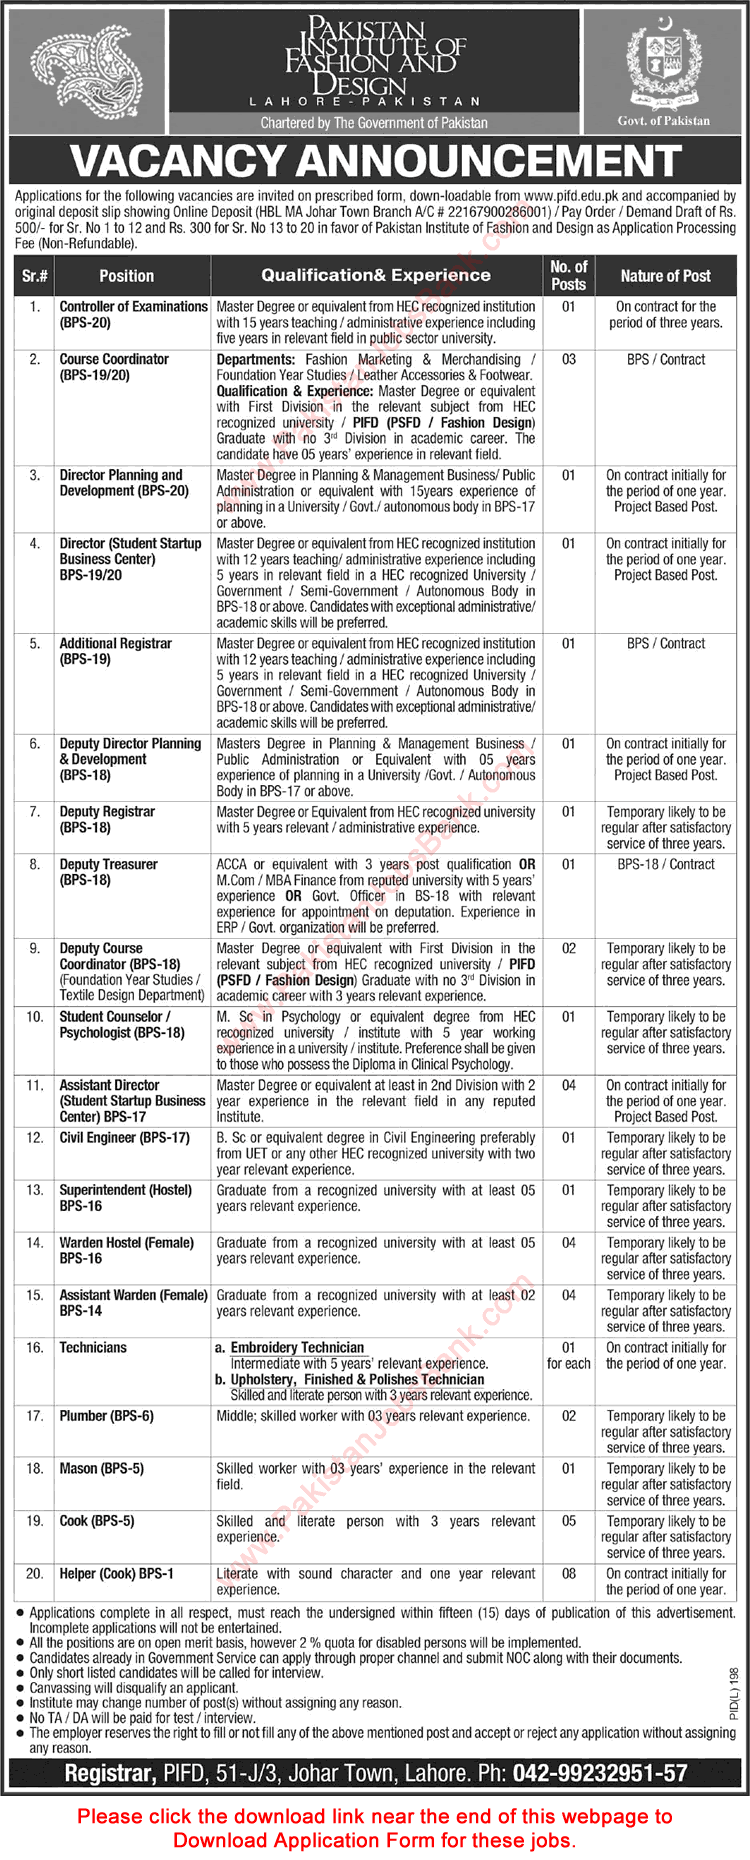 Pakistan Institute of Fashion and Design Lahore Jobs 2016 July PIFD Application Form Download Latest